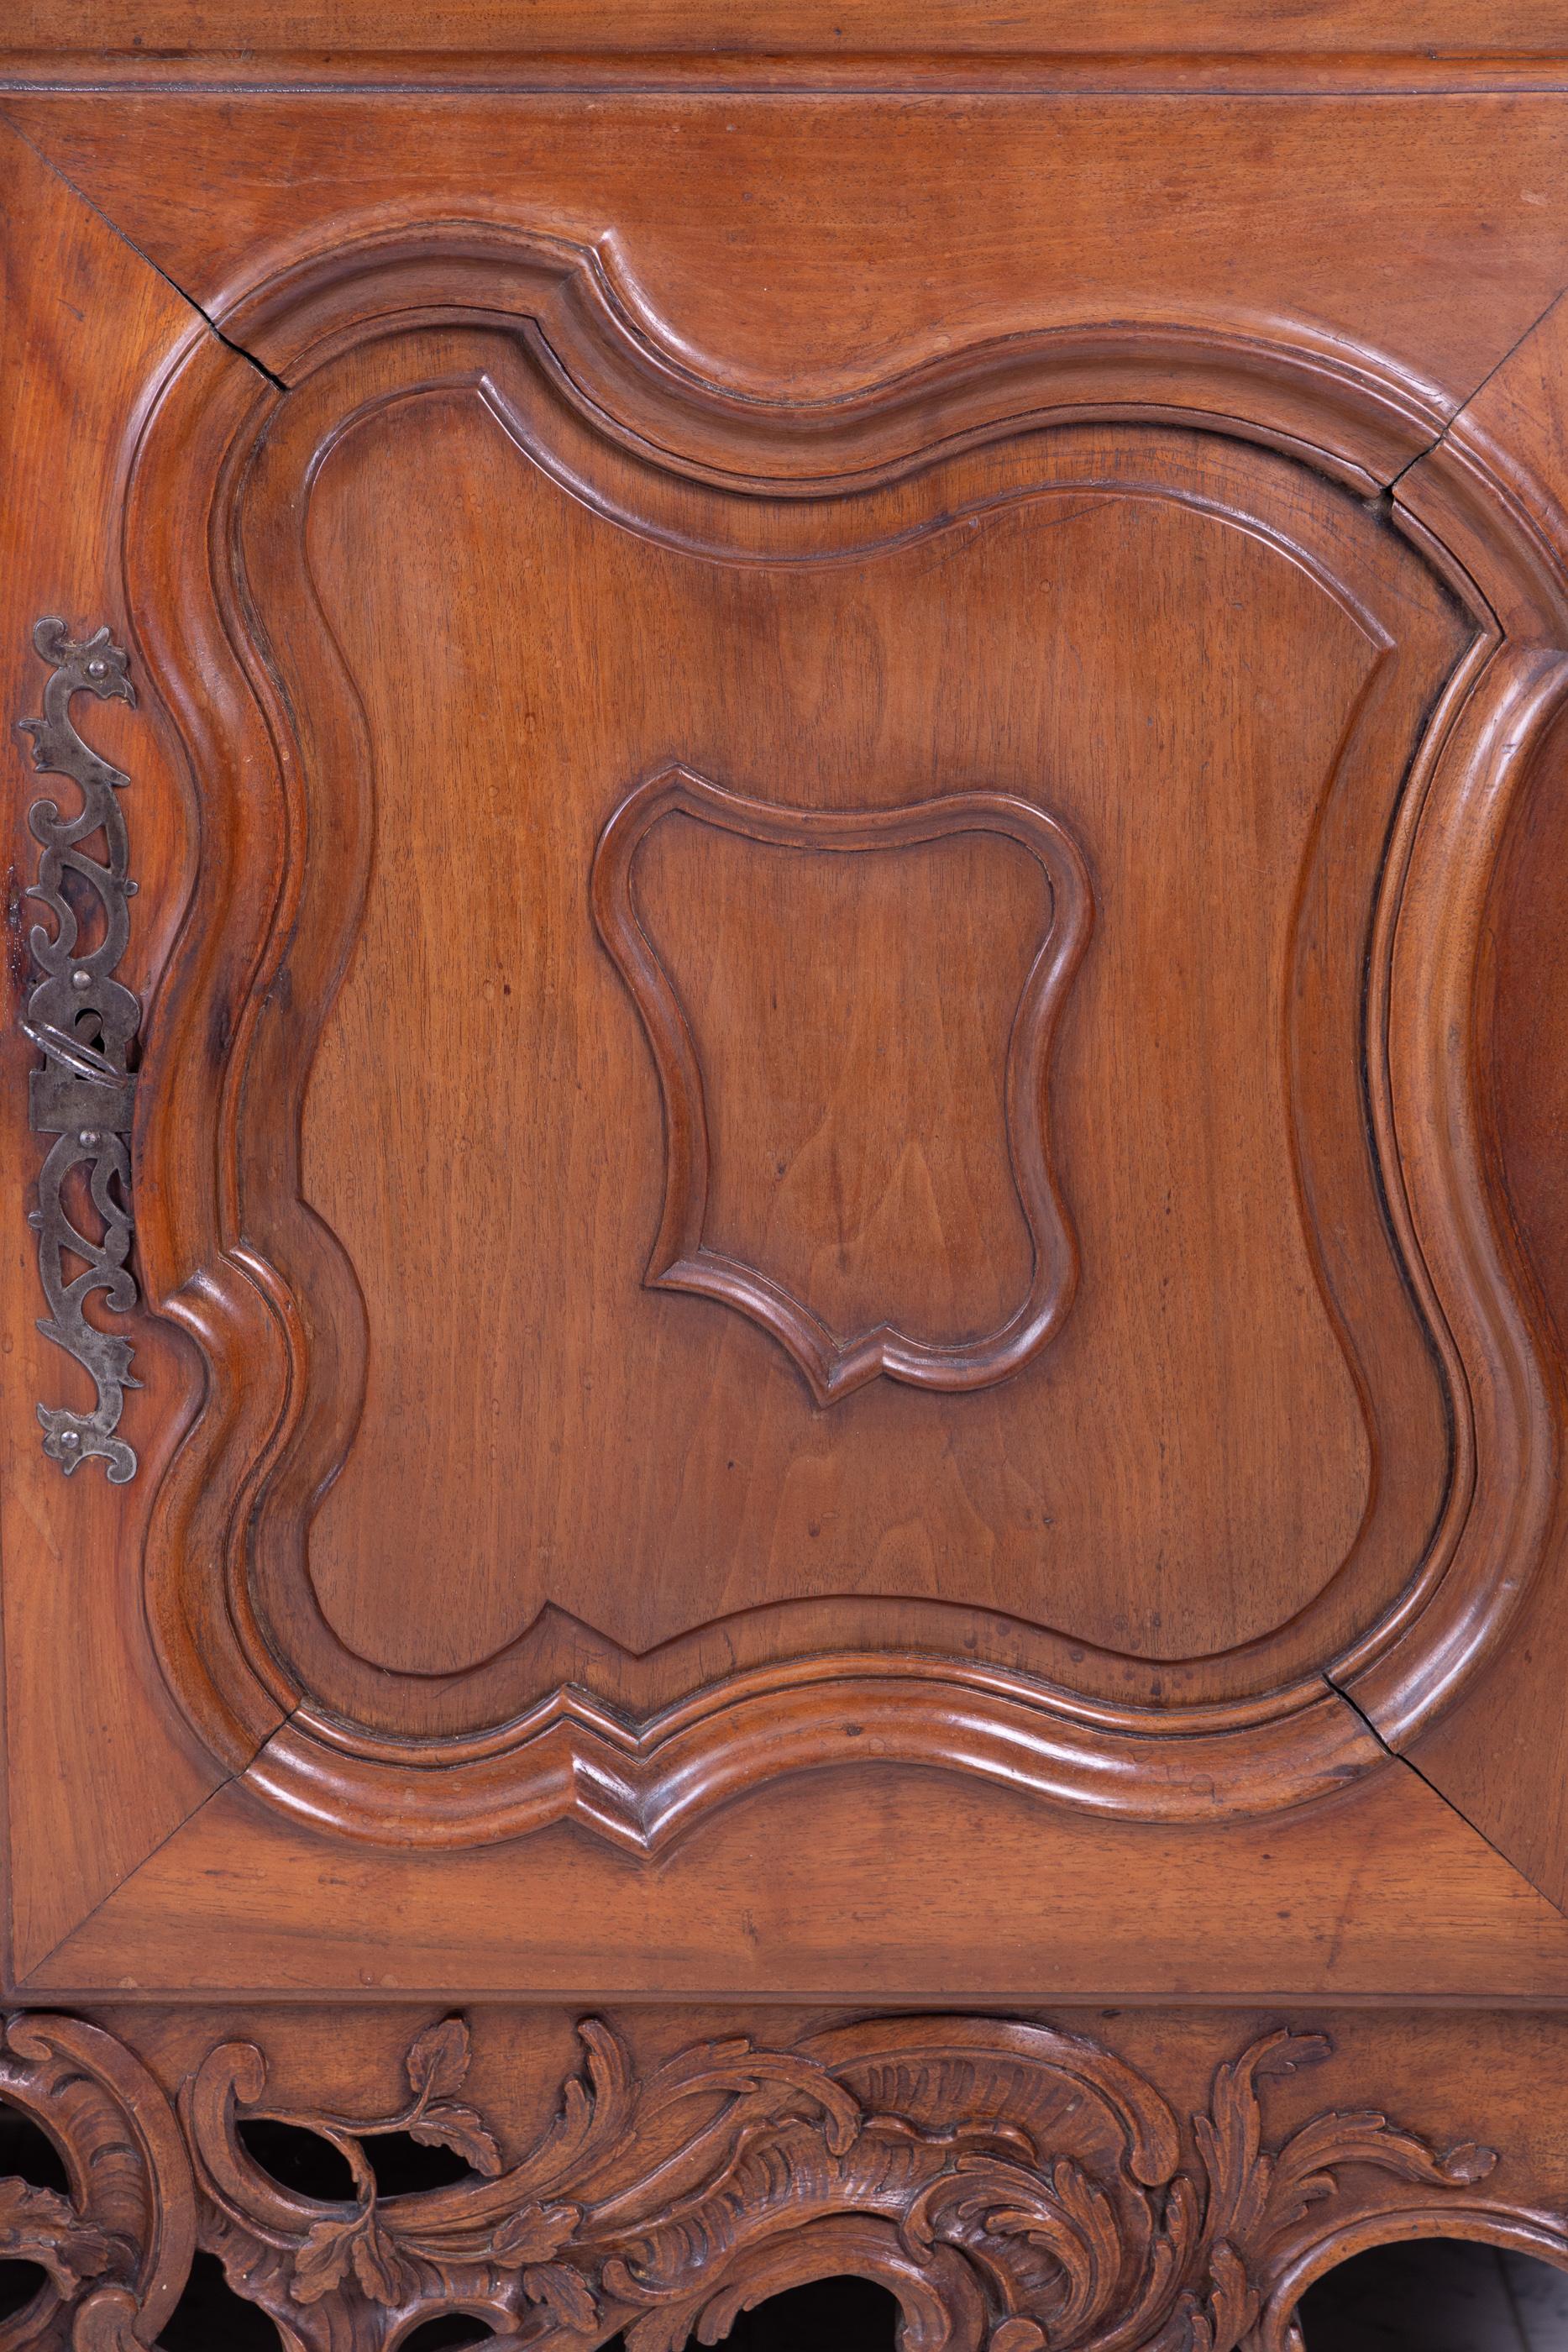 Exquisite 18th century Lyonnaise Carved Walnut Buffet, Country French  In Good Condition For Sale In New Orleans, LA